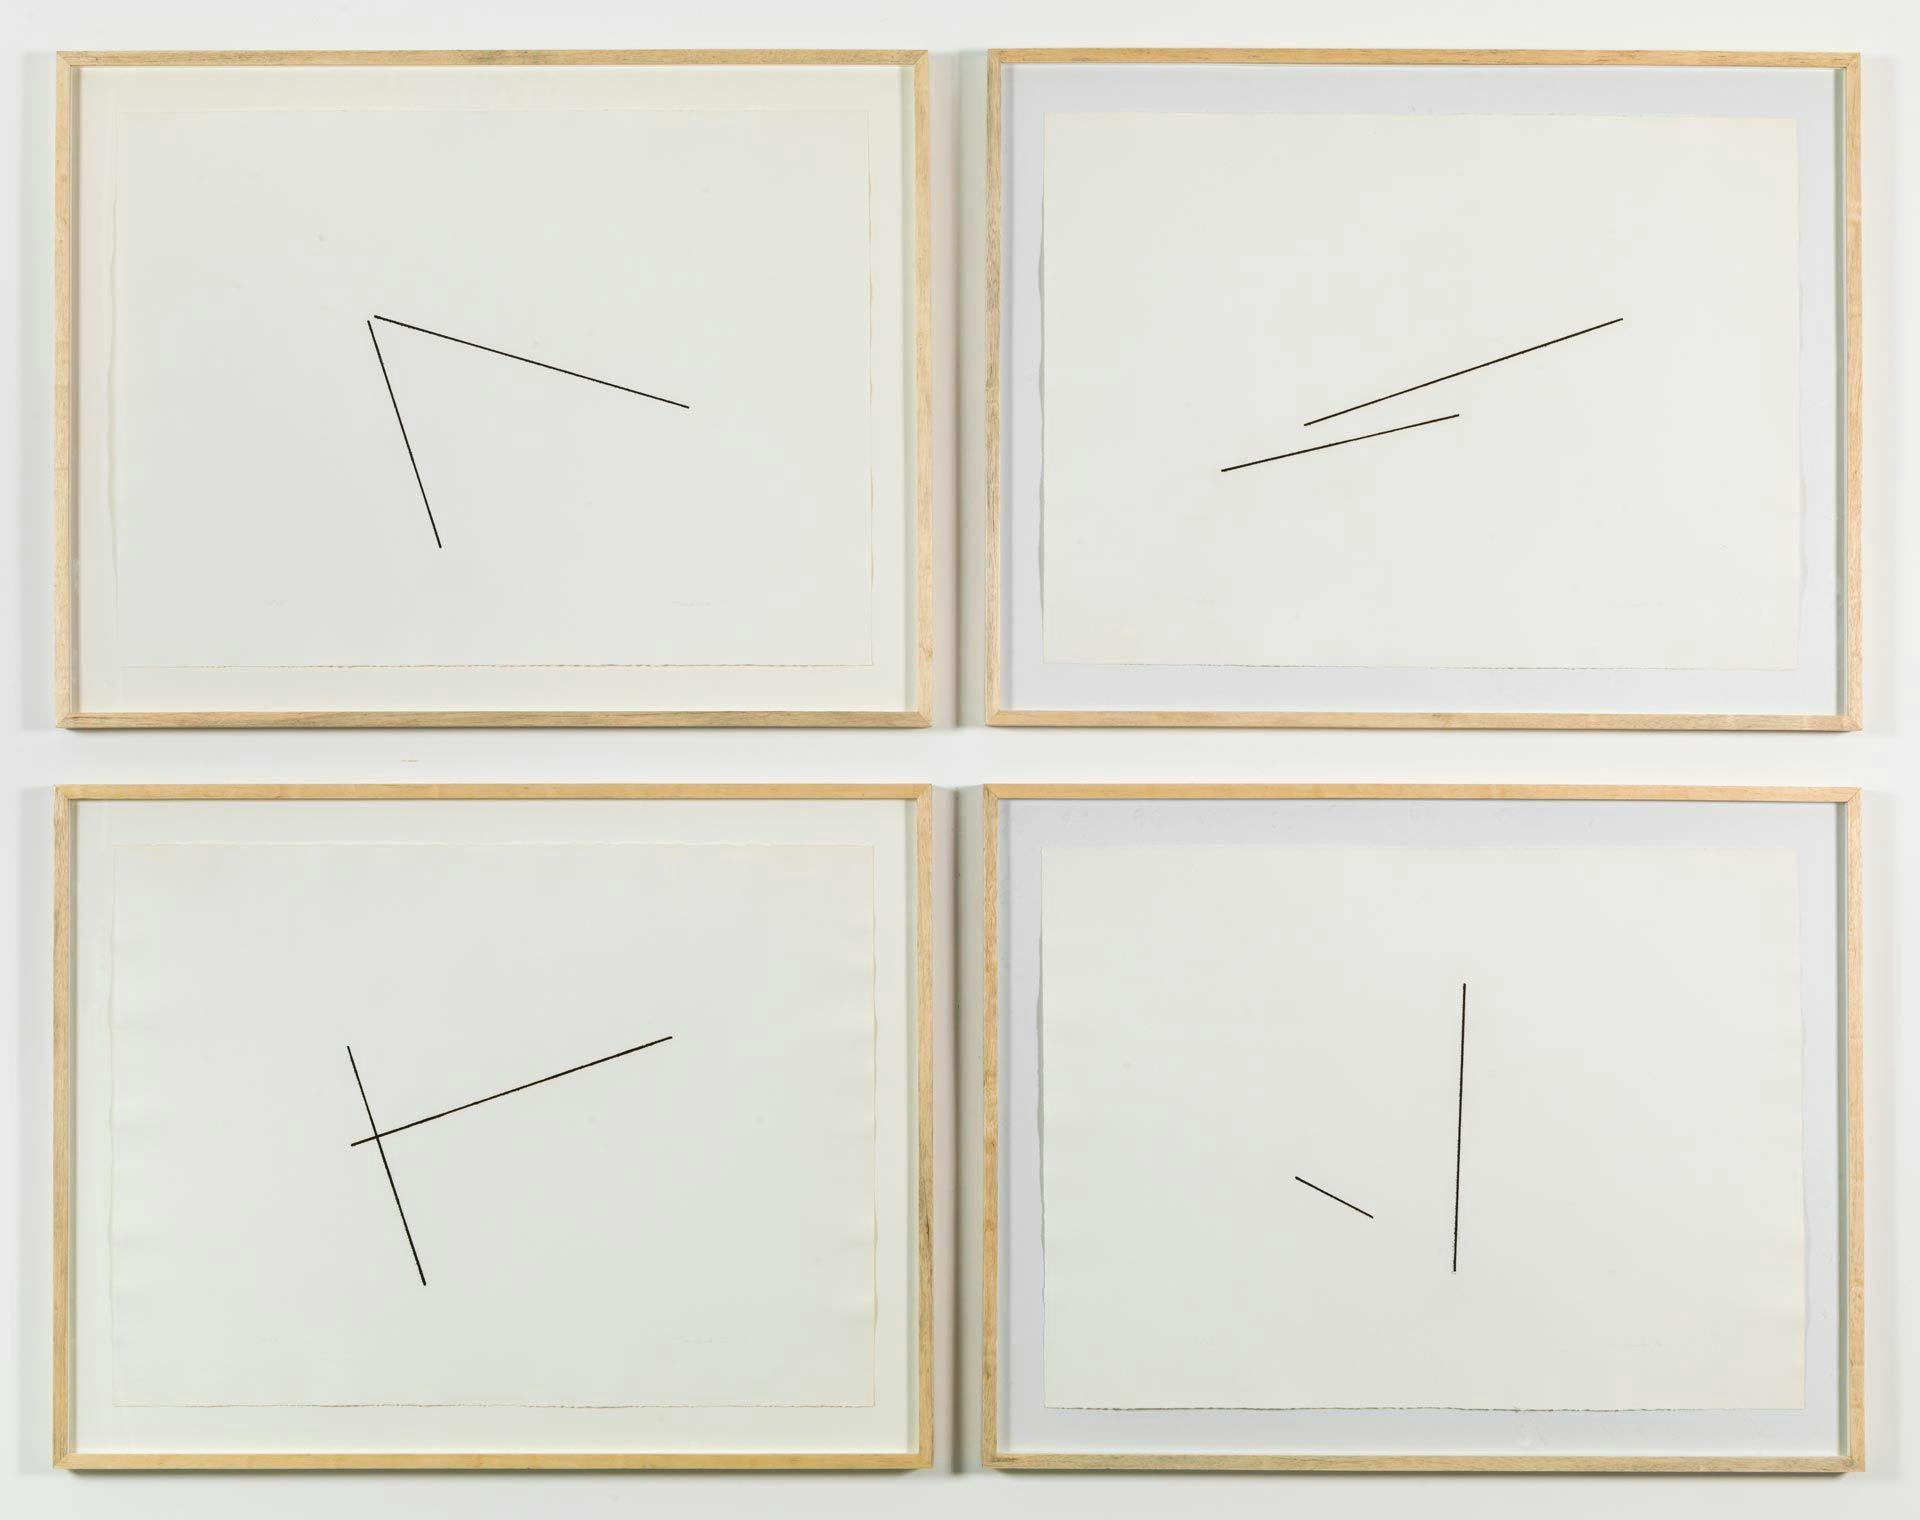 A print by Fred Sandback, titled, Untitled (from Four Variations of Two Diagonal Lines), dated 1976.